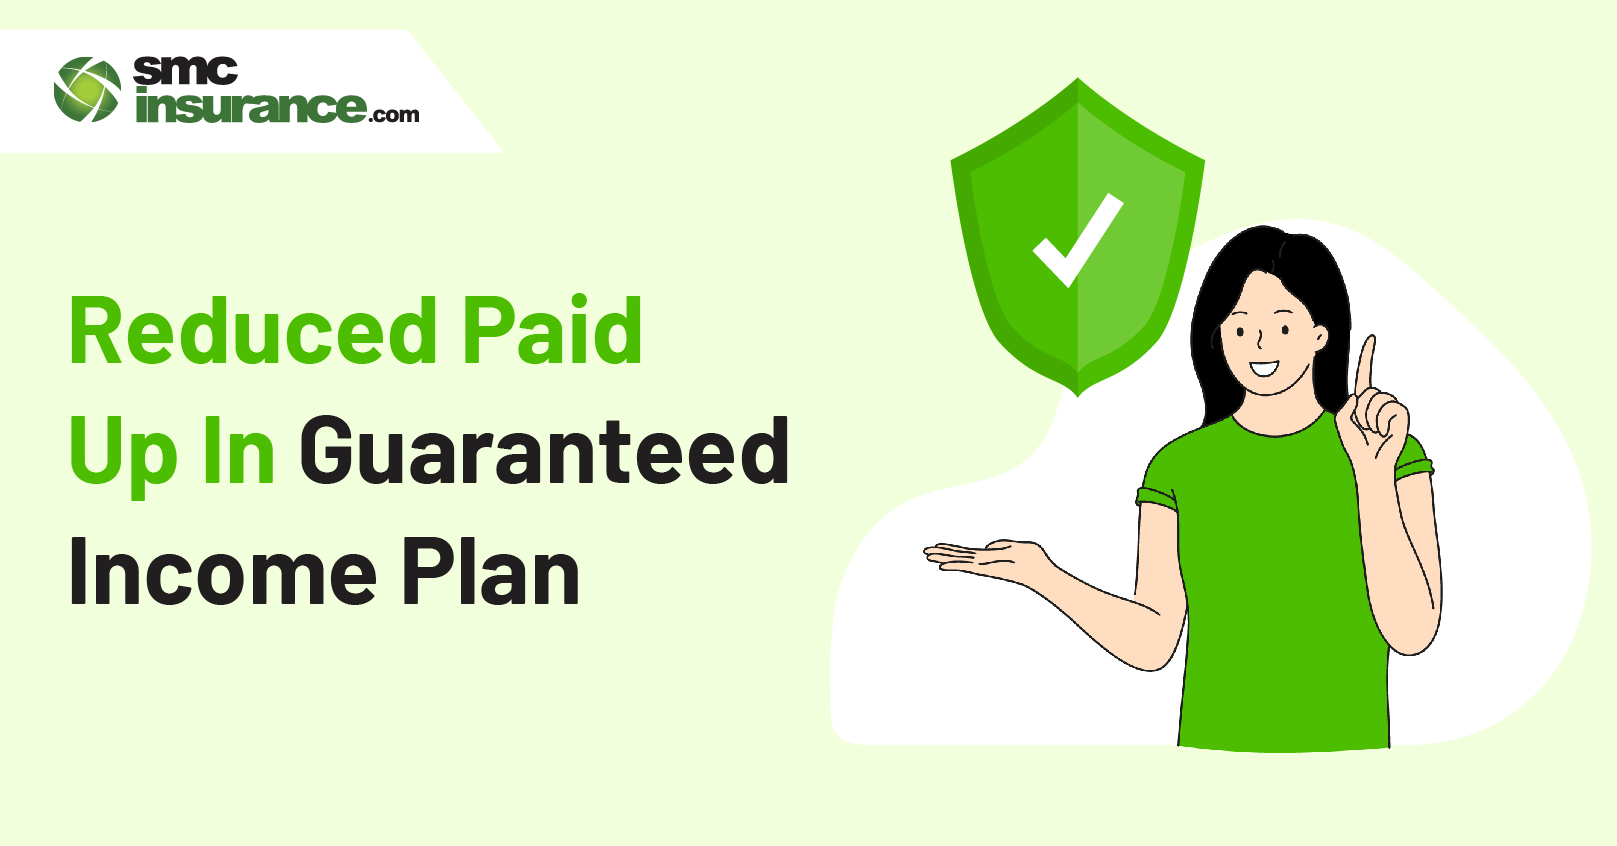 Reduced Paid-Up In Guaranteed Income Plan